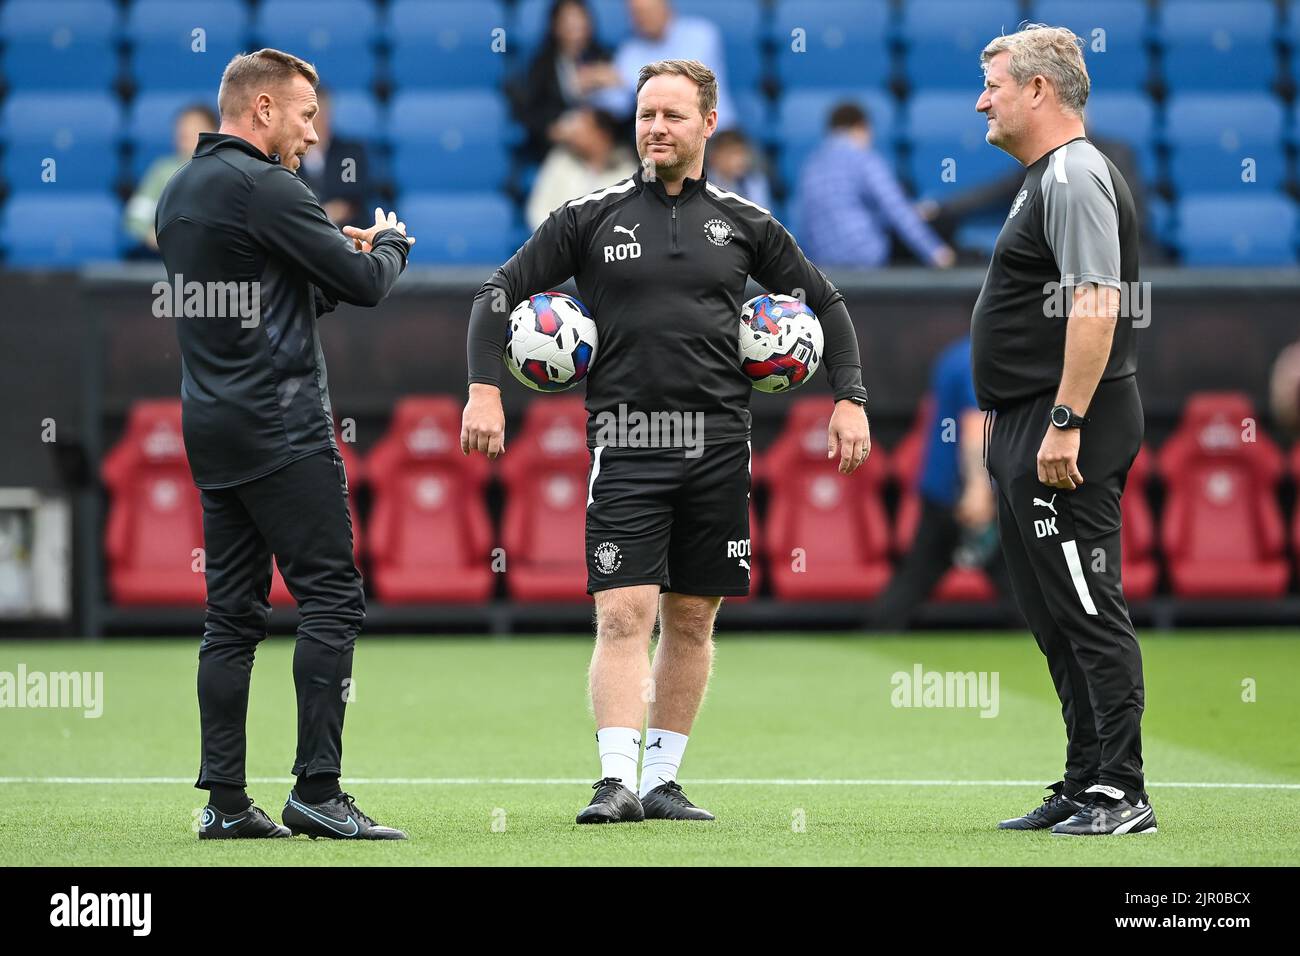 Craig Bellamy Assistant Manager of Burnley chats with David Kerslake and Richard O'Donnell Assistant Head Coach of Blackpool during the pre-game warmup in, on 8/20/2022. (Photo by Craig Thomas/News Images/Sipa USA) Credit: Sipa USA/Alamy Live News Stock Photo